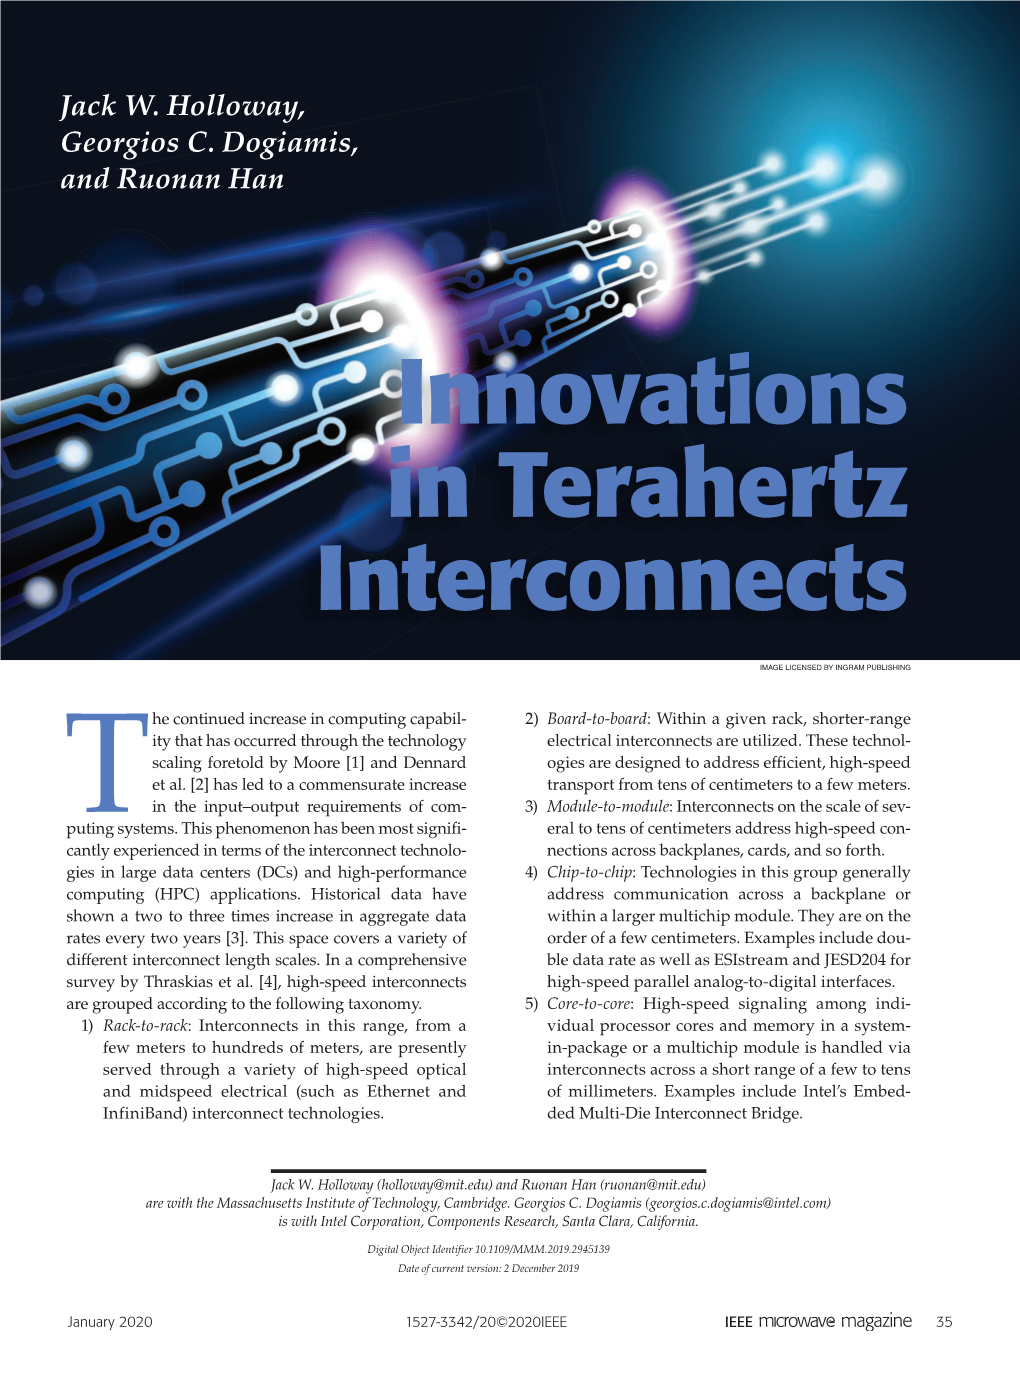 Innovations in Terahertz Interconnects